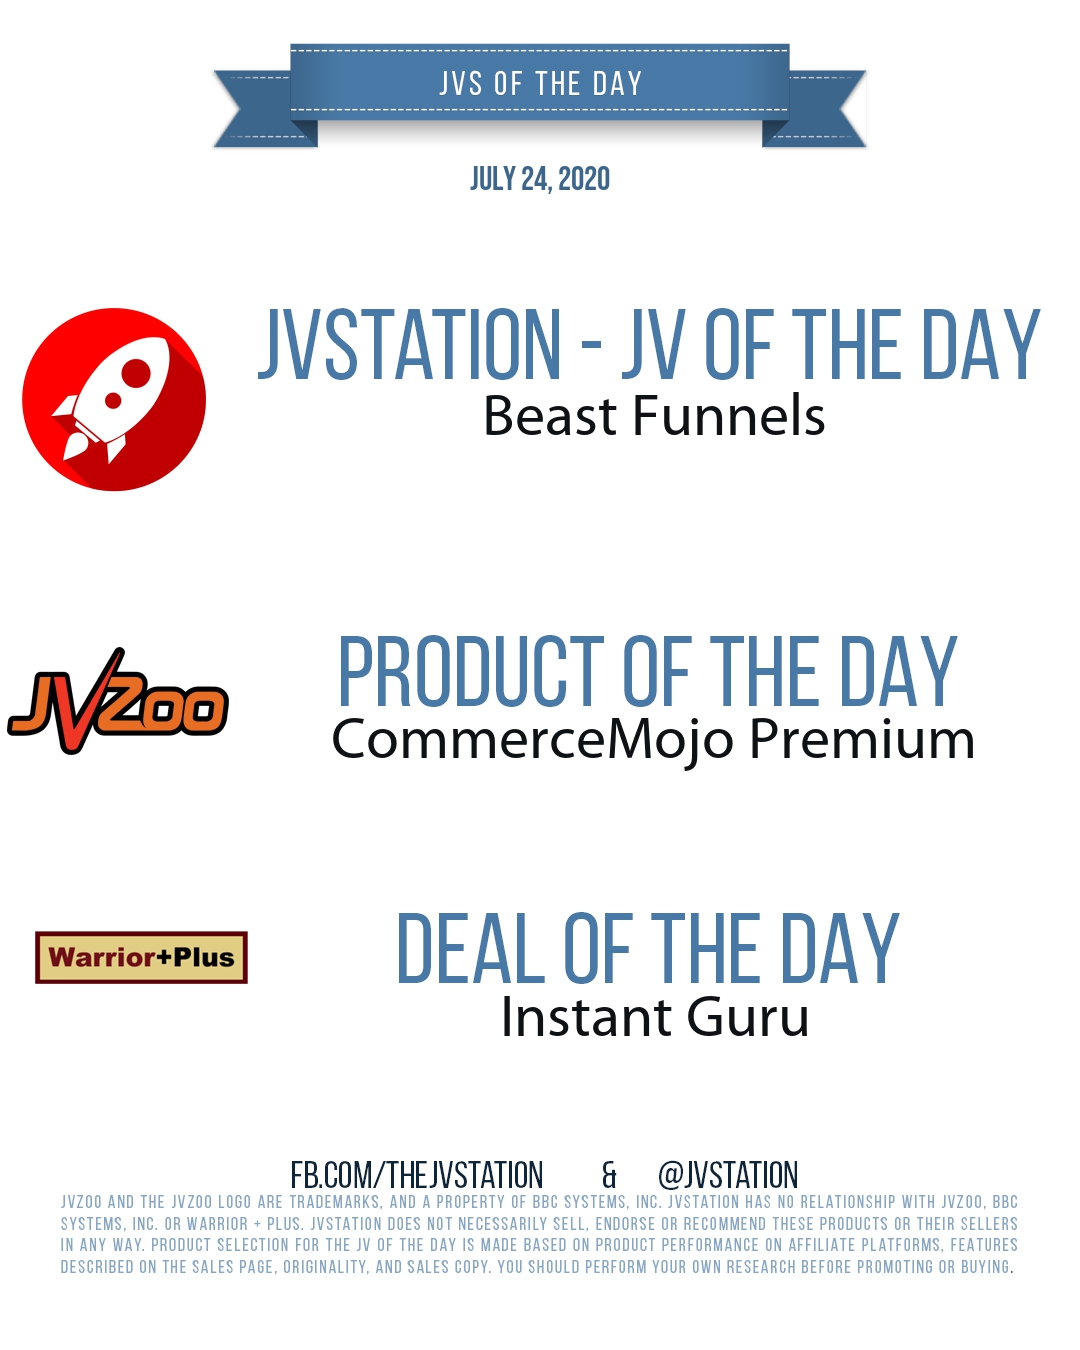 JVs of the day - July 24, 2020